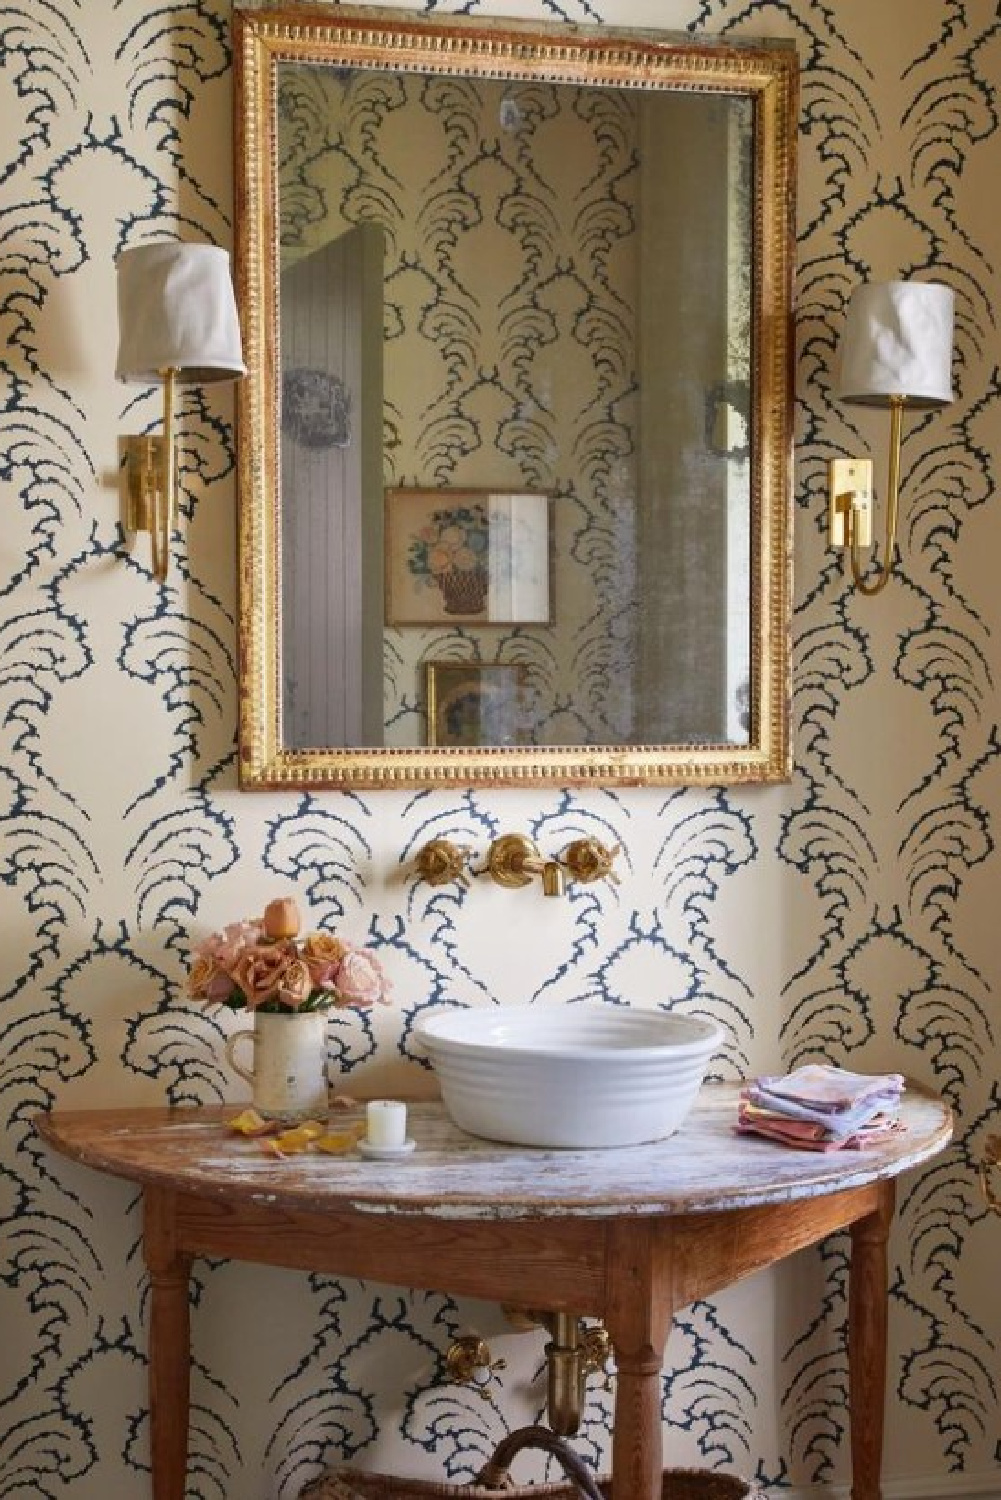 Beautiful powder bath with fresh roses. Timeless interior design by Shannon Bowers with nods to European antiques, patina, understated elegance, and sophisticated simplicity. #shannonbowers #timelessinteriors